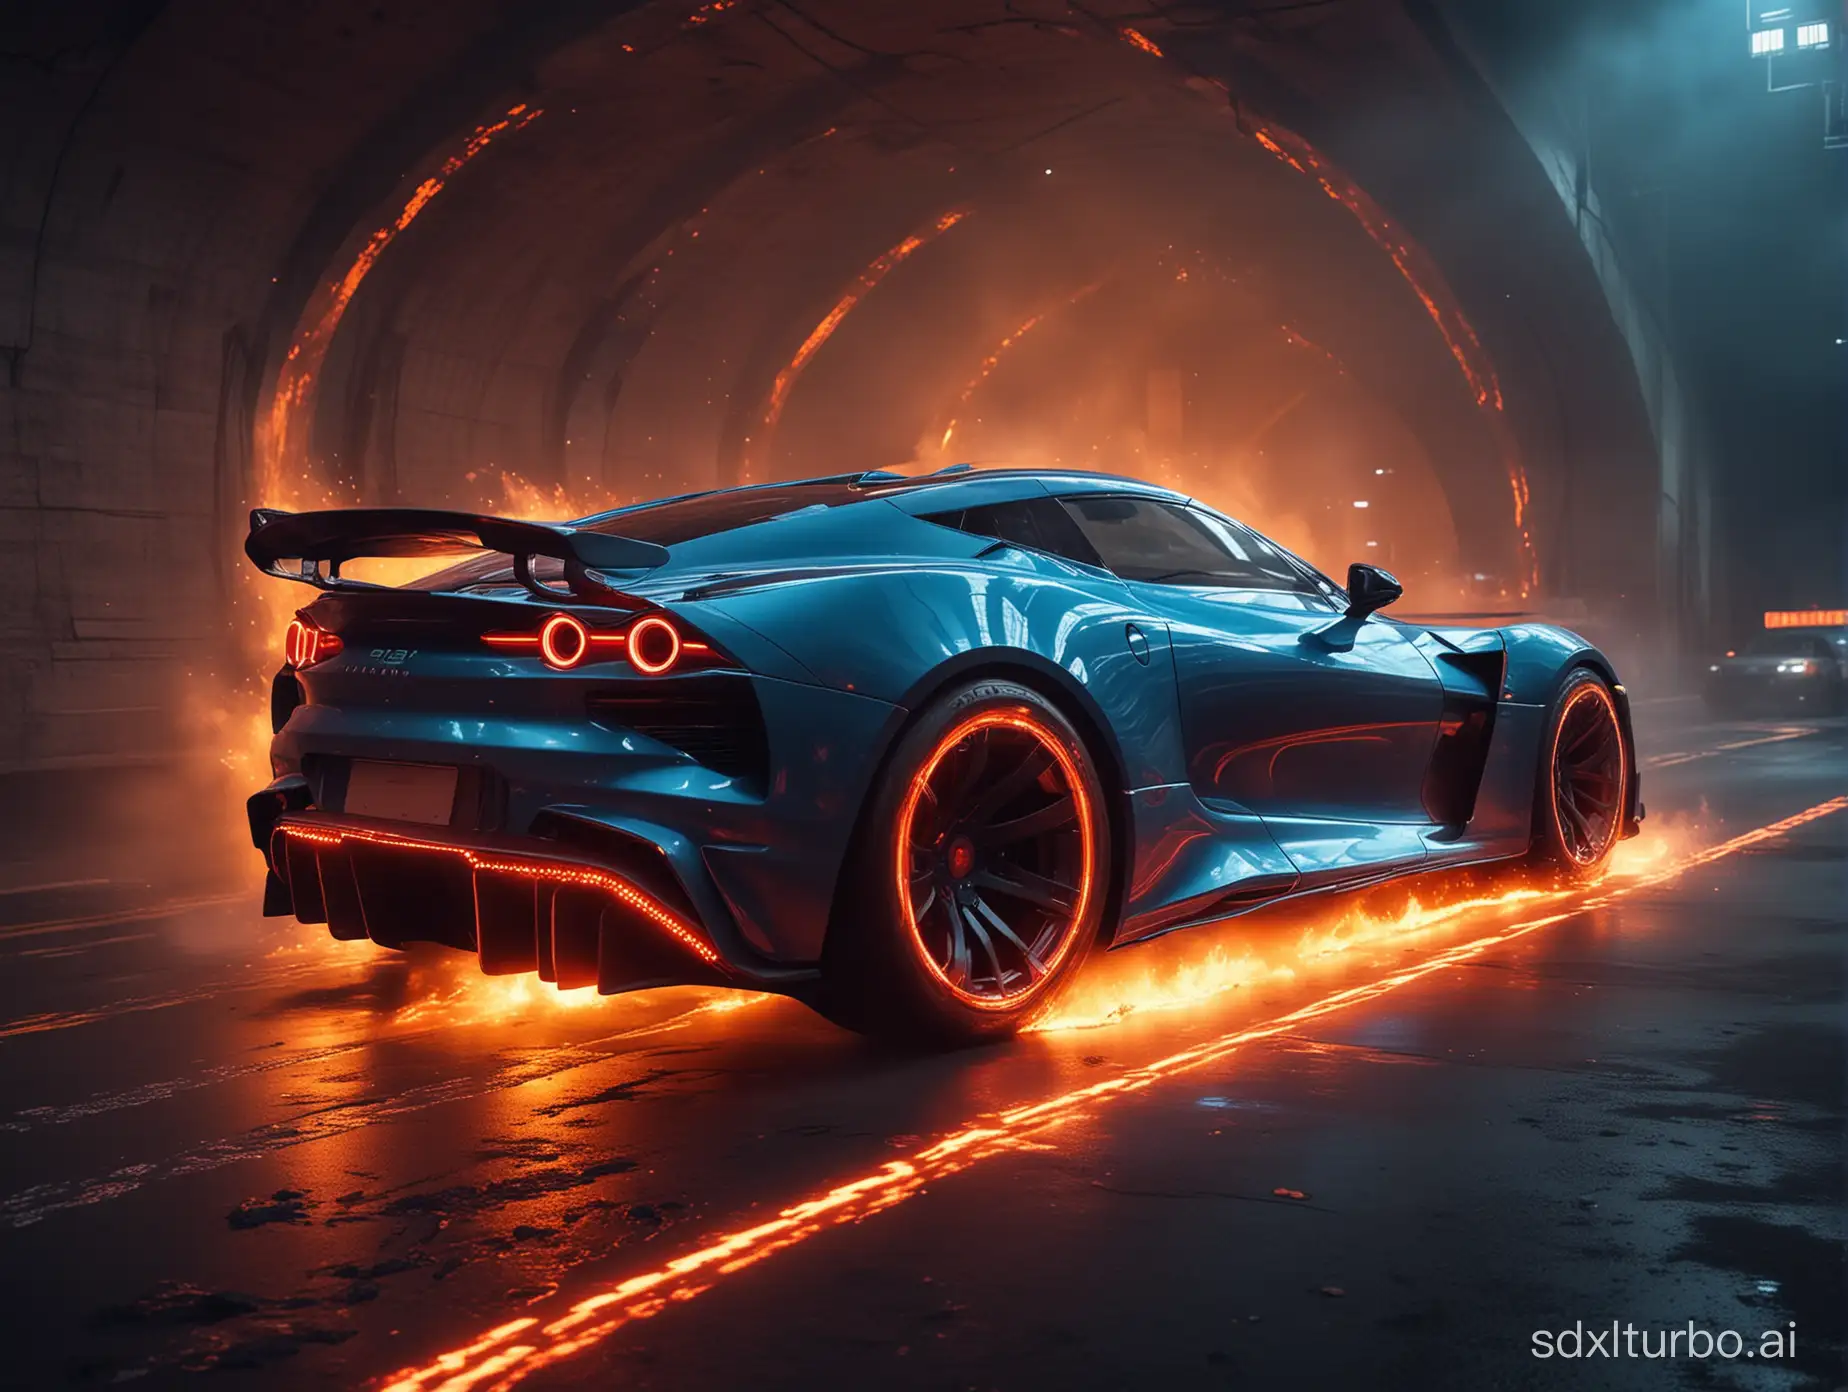 The sports car of the future, which is speeding through a tunnel full of neon lights. The tunnel is full of flames. The design of the vehicle is very streamlined, with a sci-fi style. The body reflects the colors of the surrounding environment. The tires rub against the ground and sparks. The overall fire is everywhere. The background lights show red, blue and other colors. The atmosphere is fantastic and dynamic.